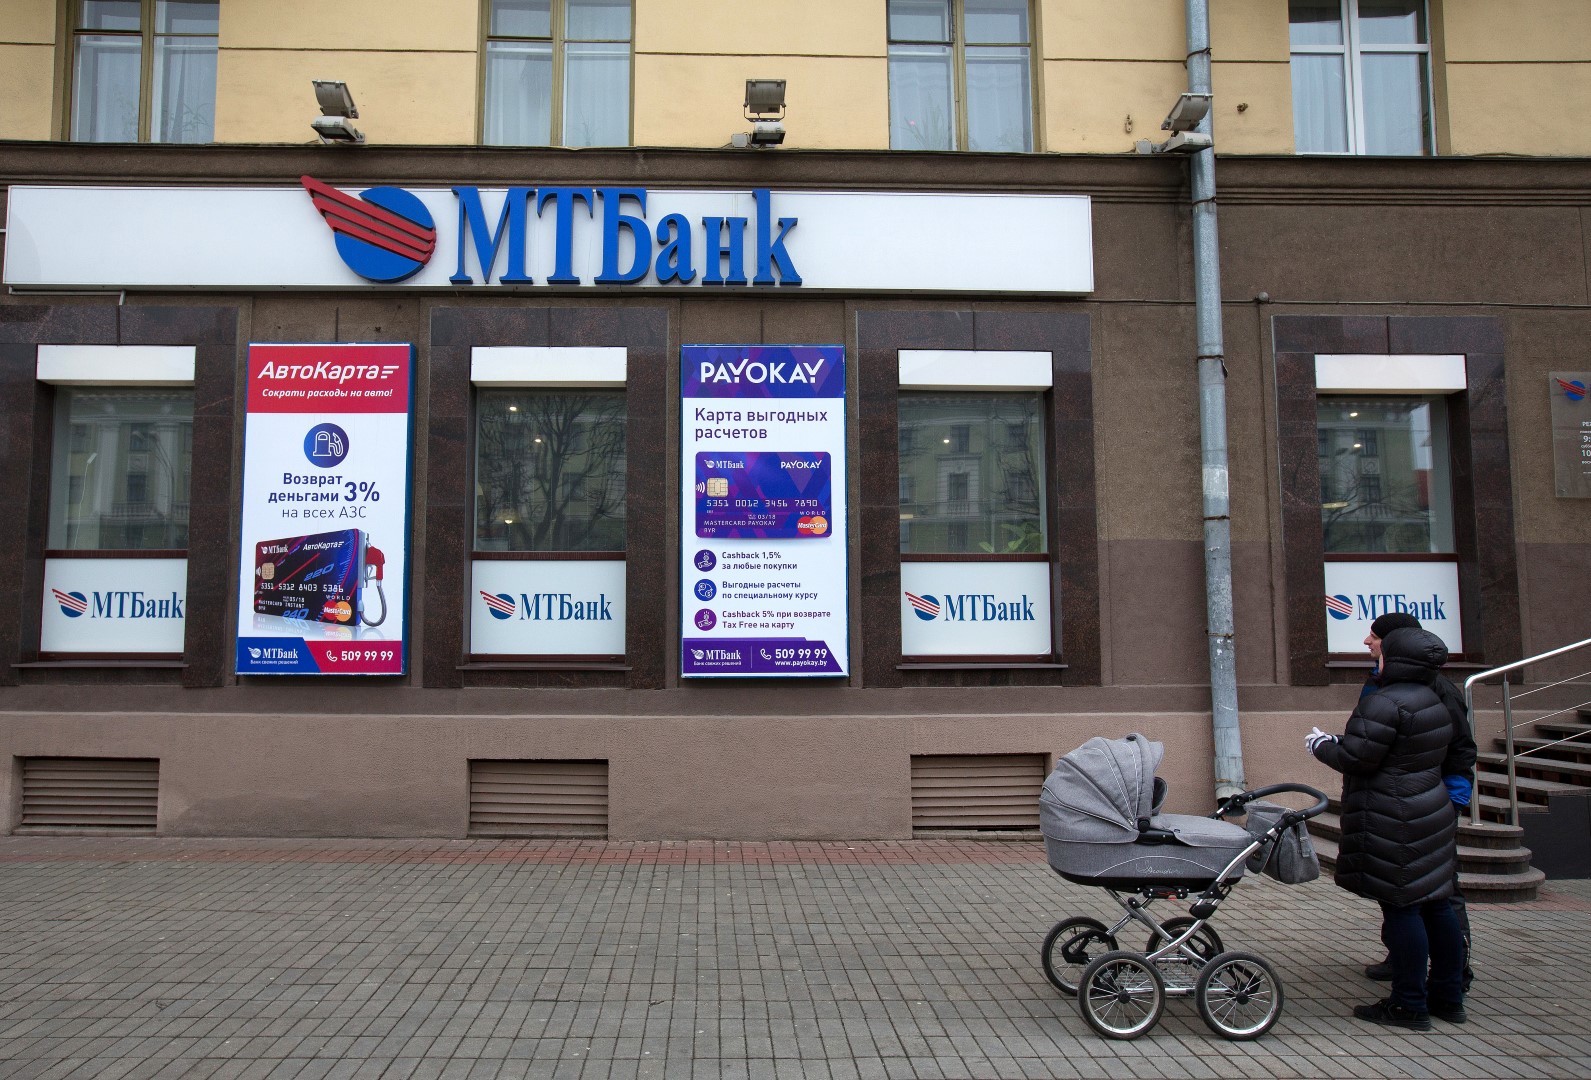 Pedestrians pause outside a branch of the Minsk Transit Bank CJSC, also known as MTBank, in Minsk, Belarus, on Wednesday, March 16, 2016. European Union governments scrapped sanctions on leaders of Belarus in an effort to pry the former Soviet republic out of the shadow of the Kremlin. Photographer: Andrey Rudakov/Bloomberg